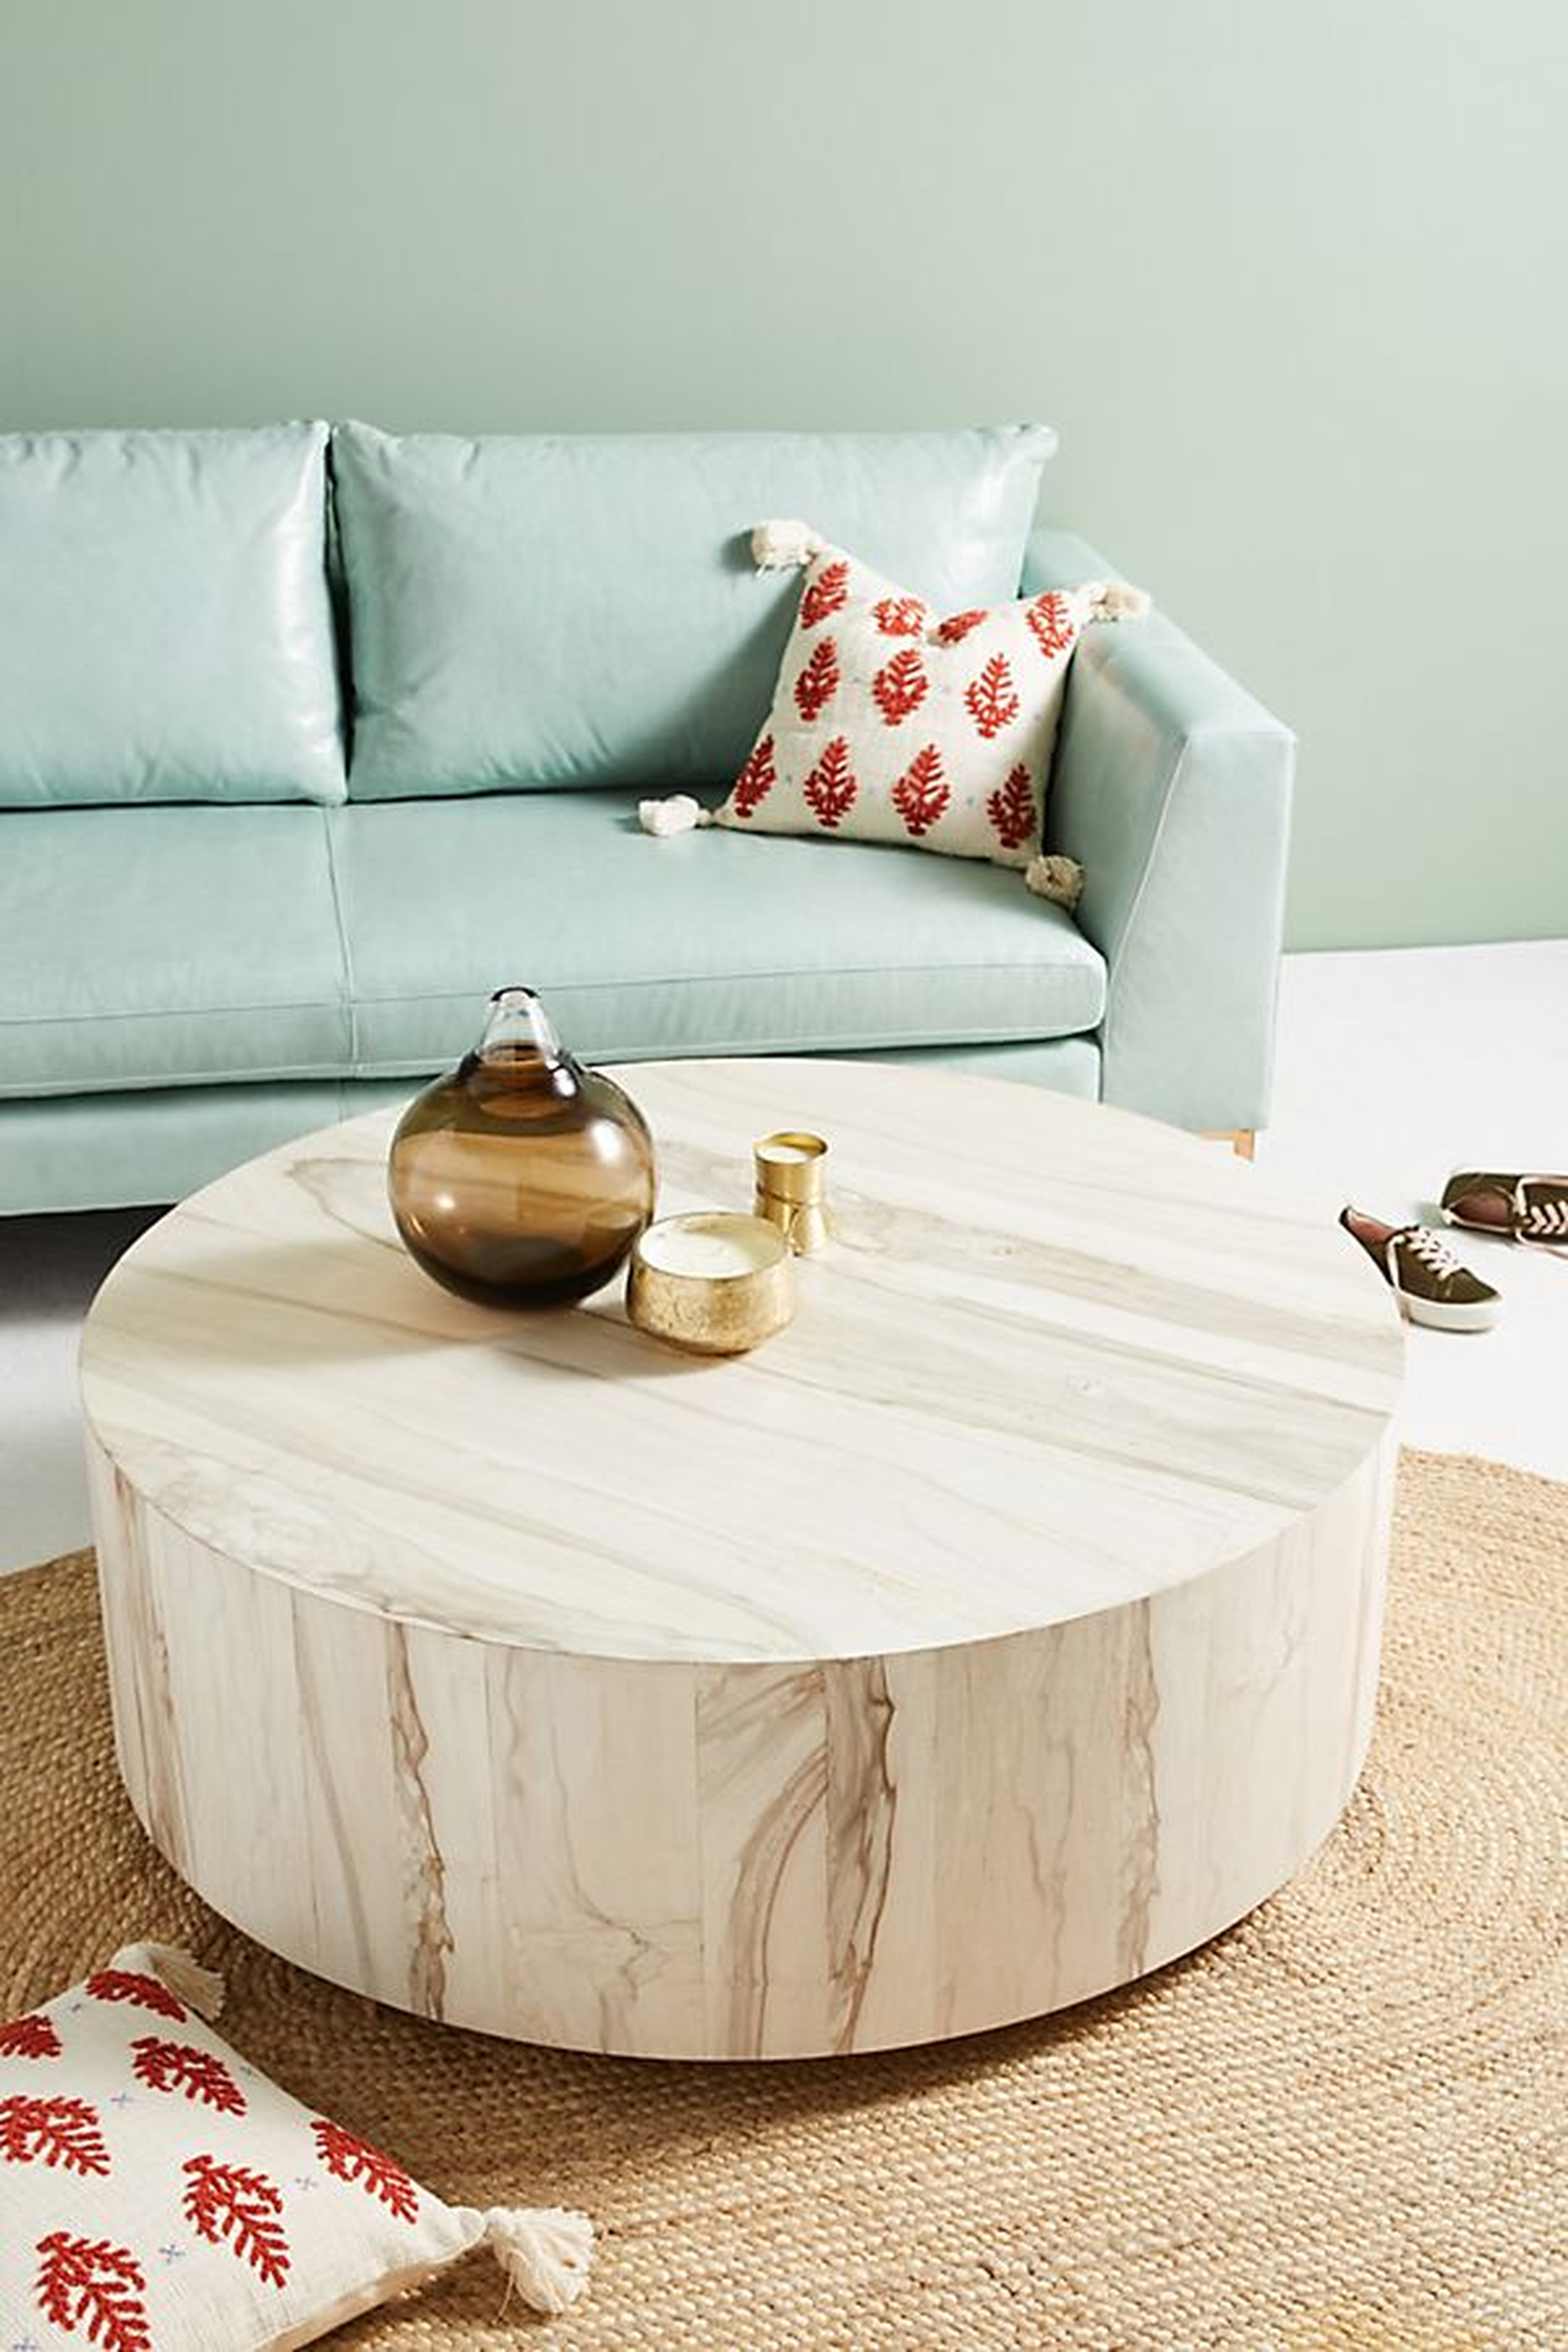 Swirled Drum Coffee Table 48" - Anthropologie